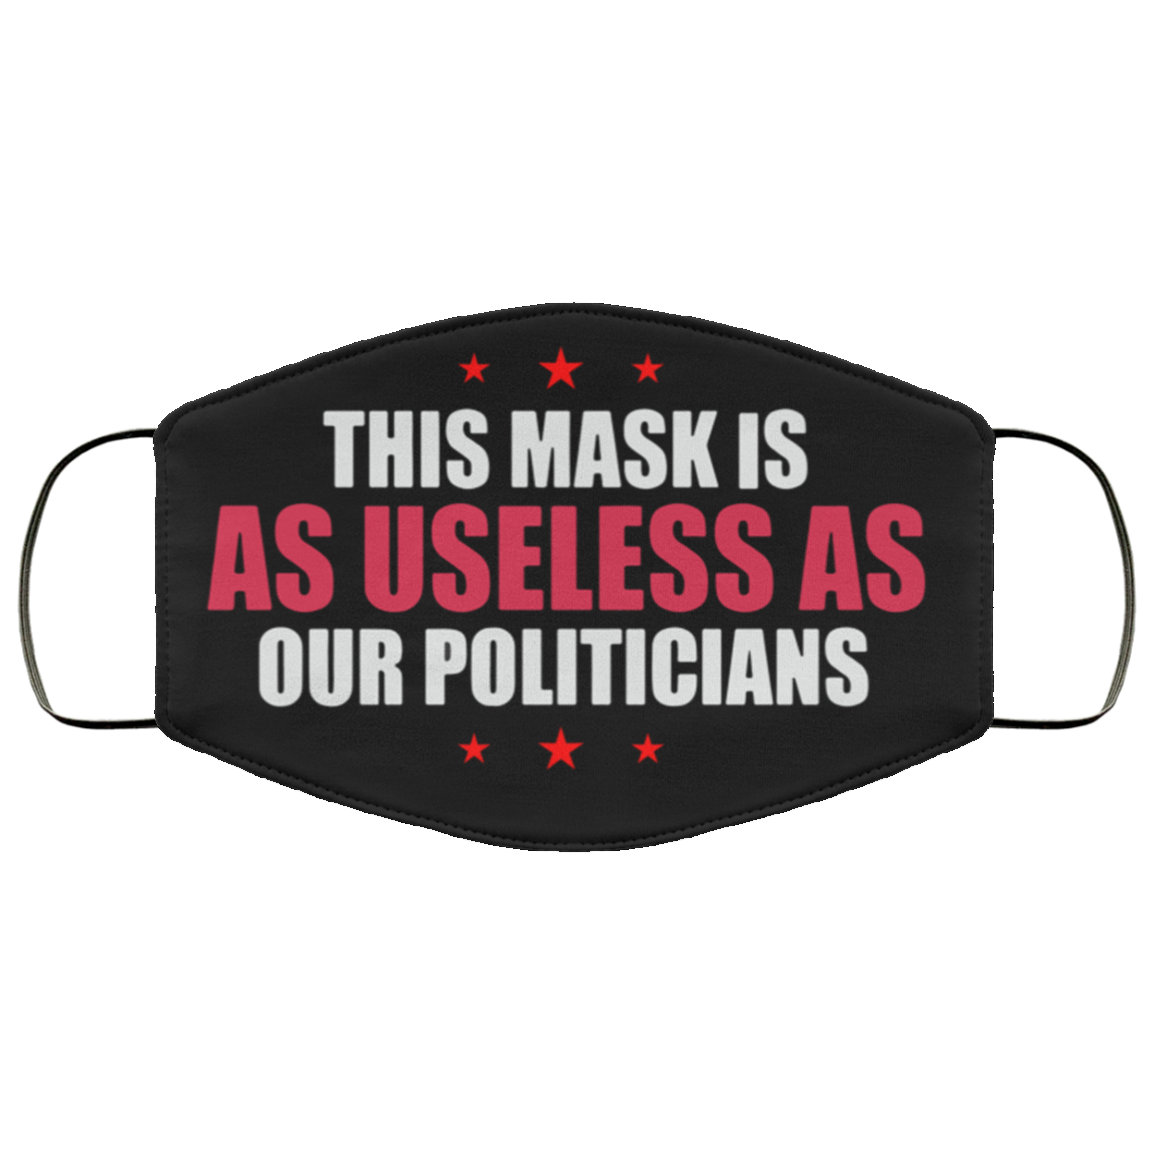 this face mask is as useless as our politicians face mask